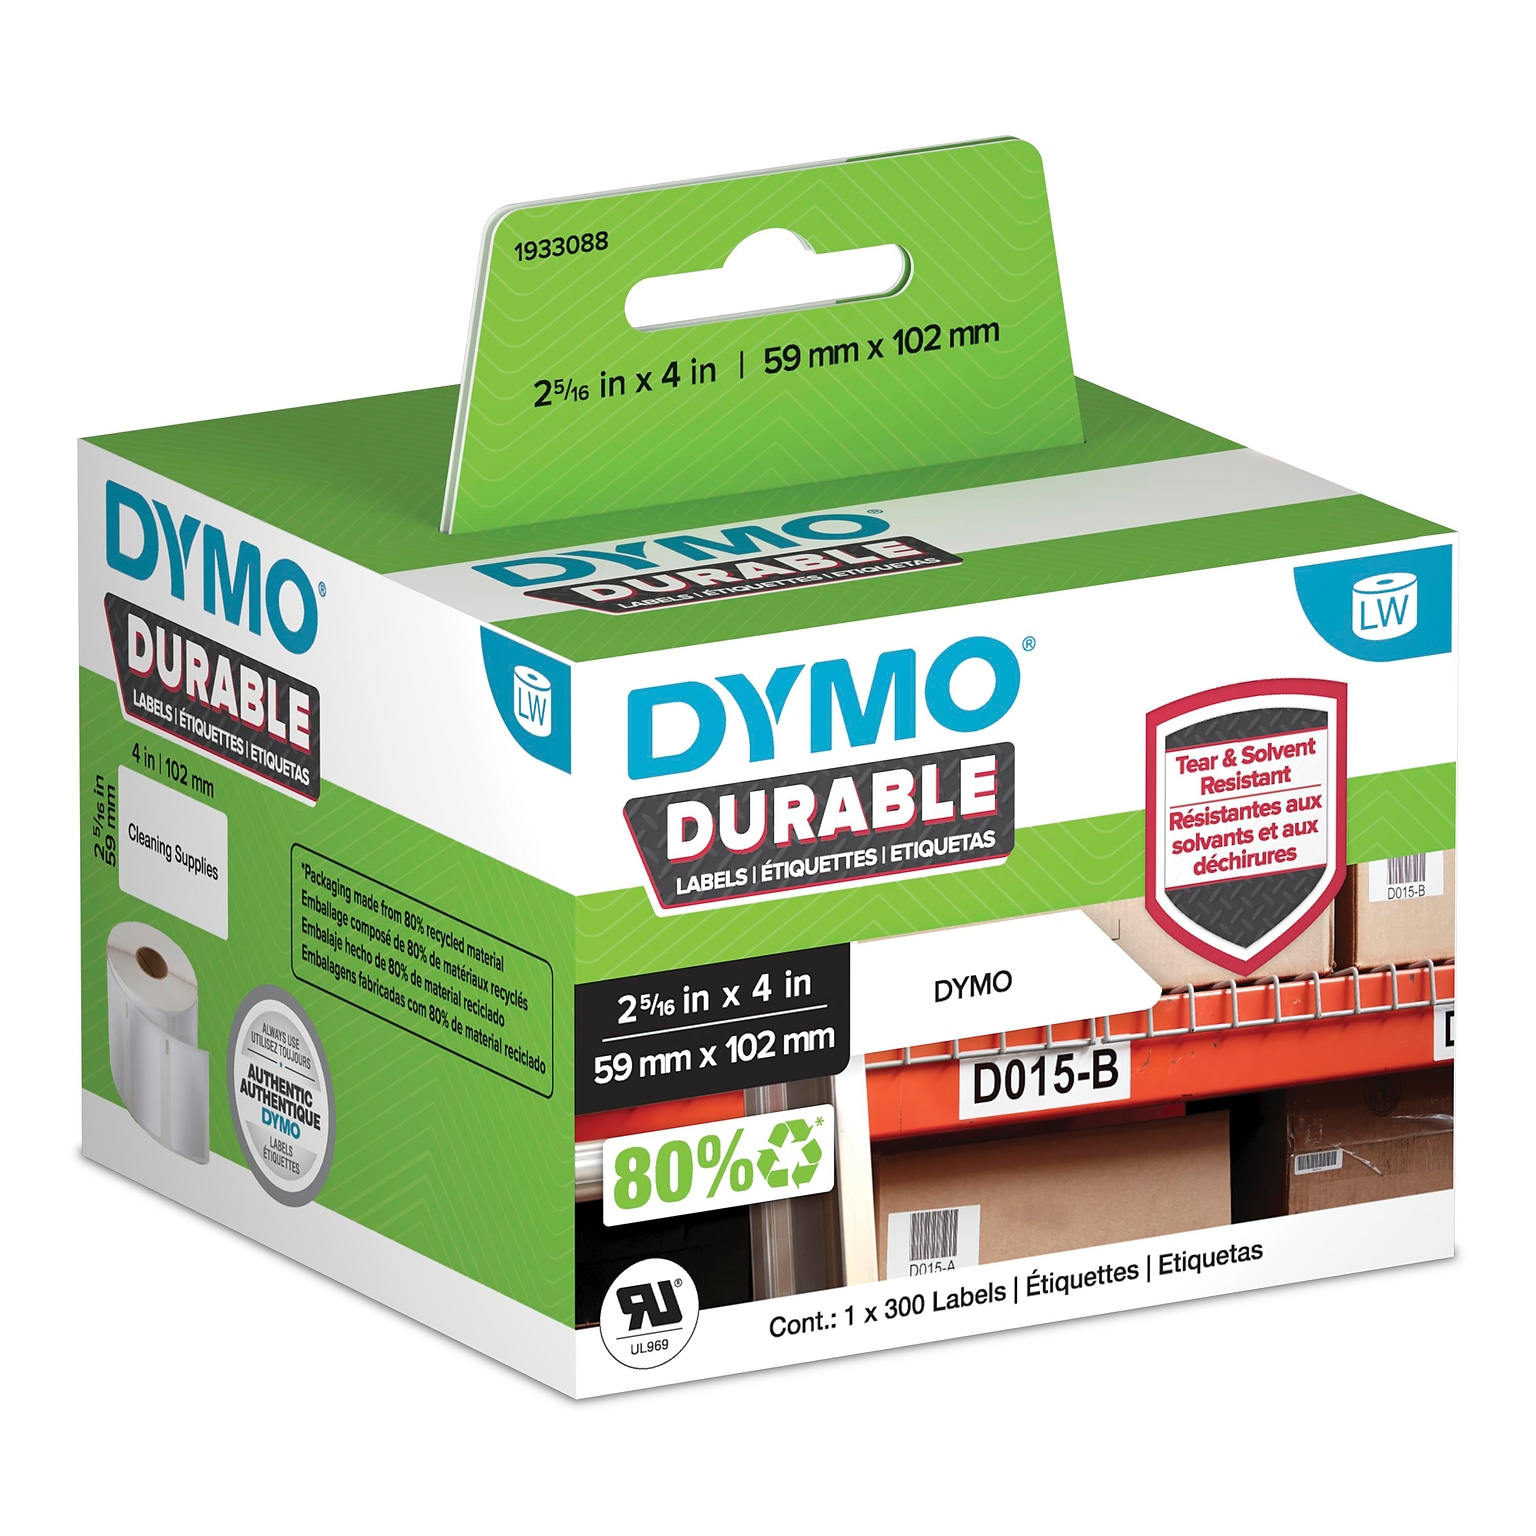 DYMO LabelWriter 1933088 Durable Industrial Labels, 4 x 2-5/16, Black on White, 300 Labels/Roll (1933088)